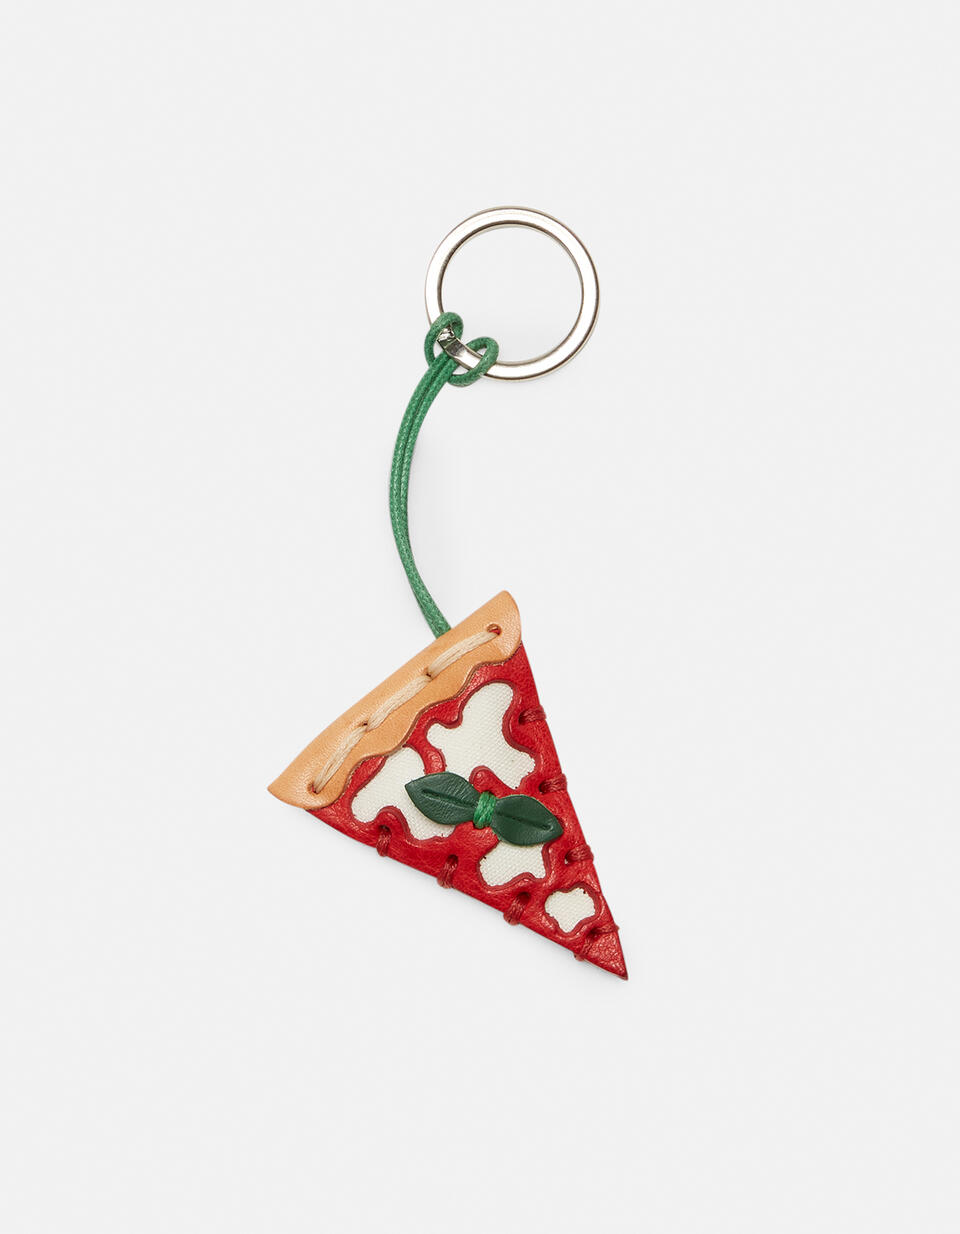 Pizza leather keyring - Key holders - Women's Accessories | Accessories ROSSO - Key holders - Women's Accessories | AccessoriesCuoieria Fiorentina